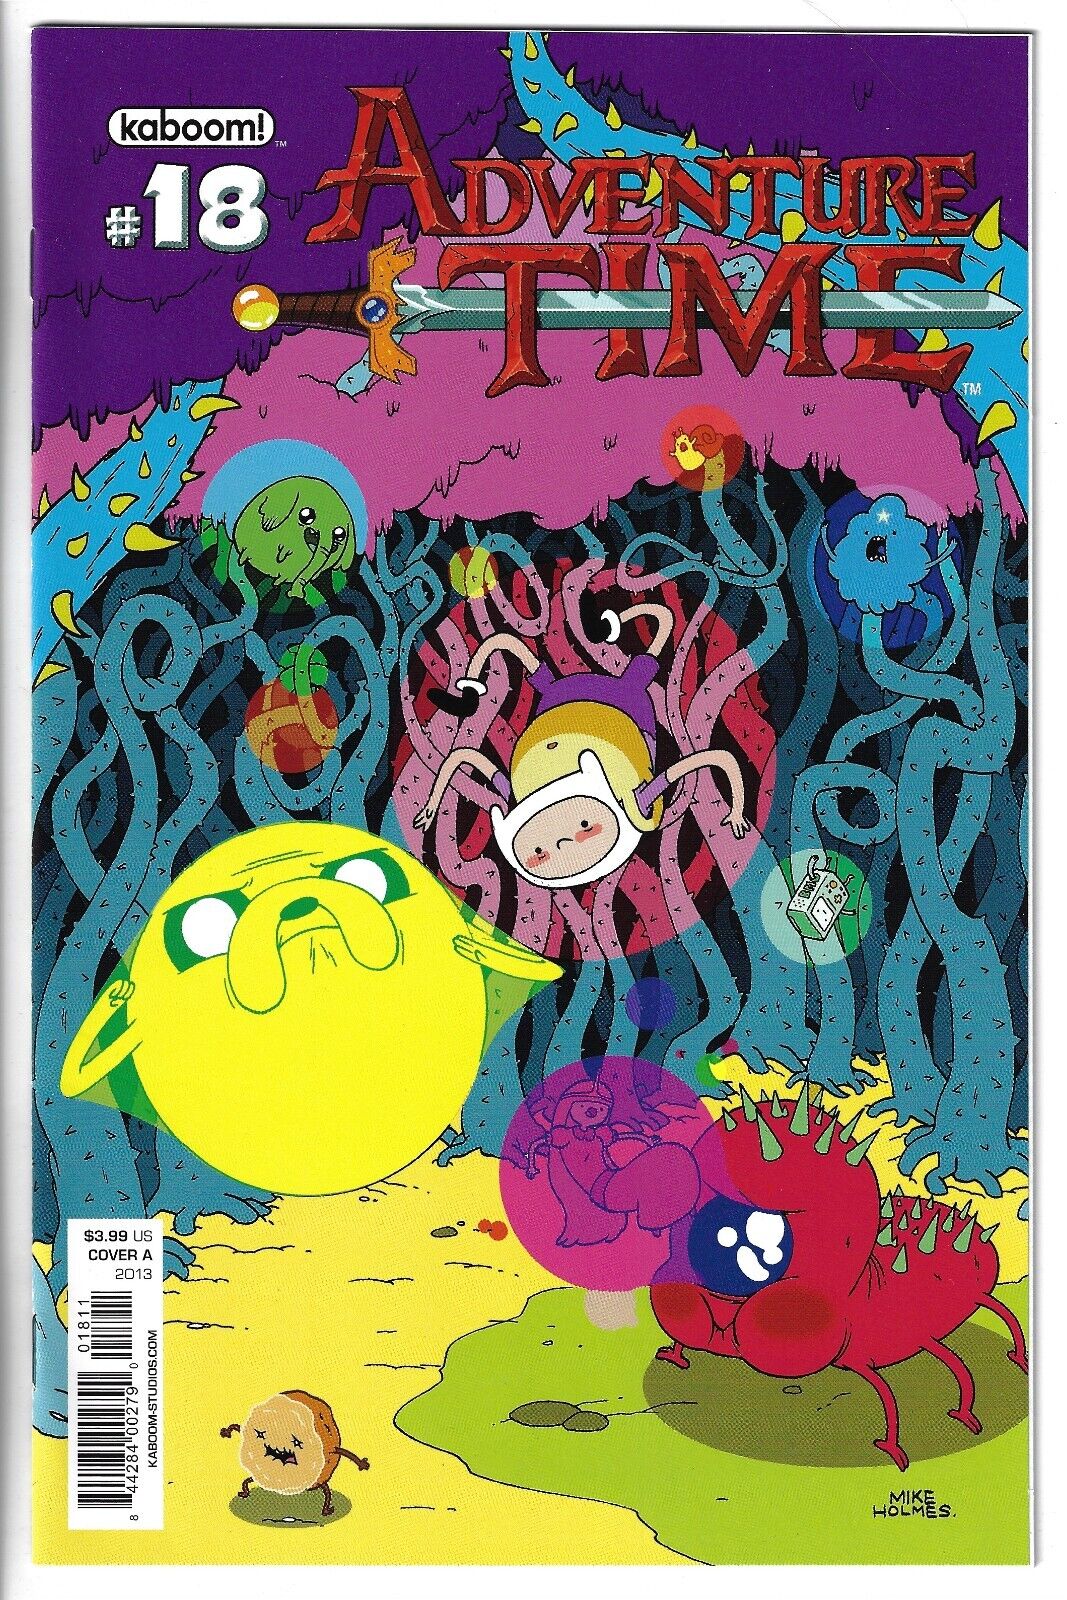 Adventure Time #18 (2013) Mike Holmes Cover